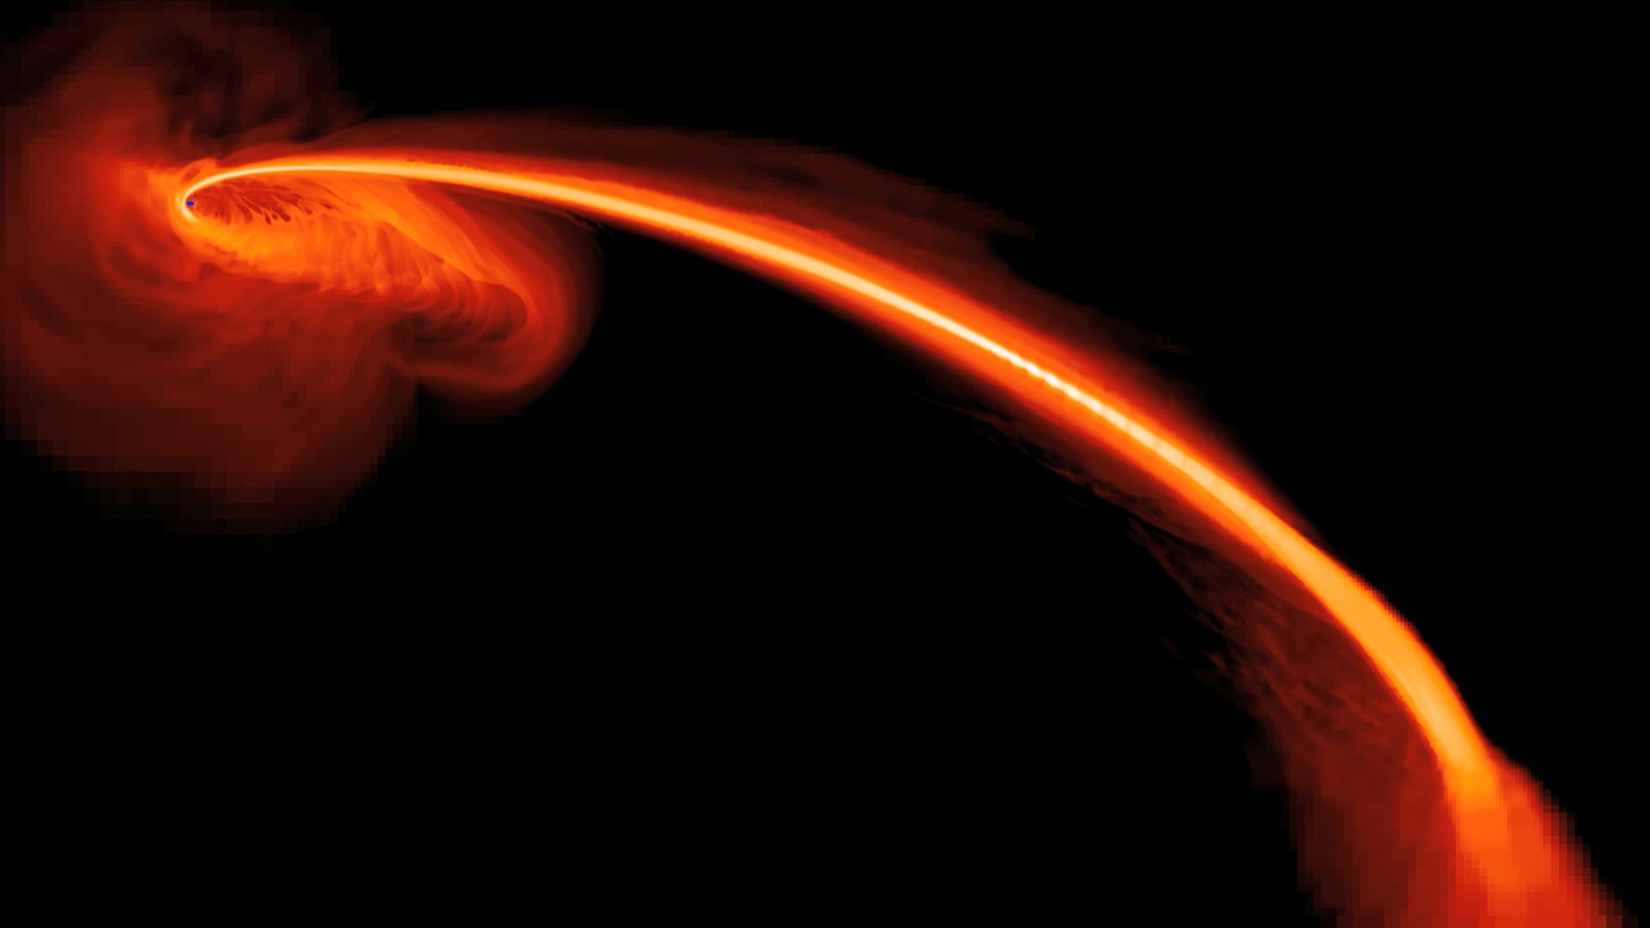 This computer-simulated image shows gas from a star that is ripped apart by tidal forces as it falls into a black hole. Some of the gas is also being ejected at high speeds into space. Using observations from telescopes in space and on the ground, astronomers have gathered the most direct evidence yet for this violent process. (Credit: NASA, S. Gezari, The Johns Hopkins University and J. Guillochon, University of California, Santa Cruz)